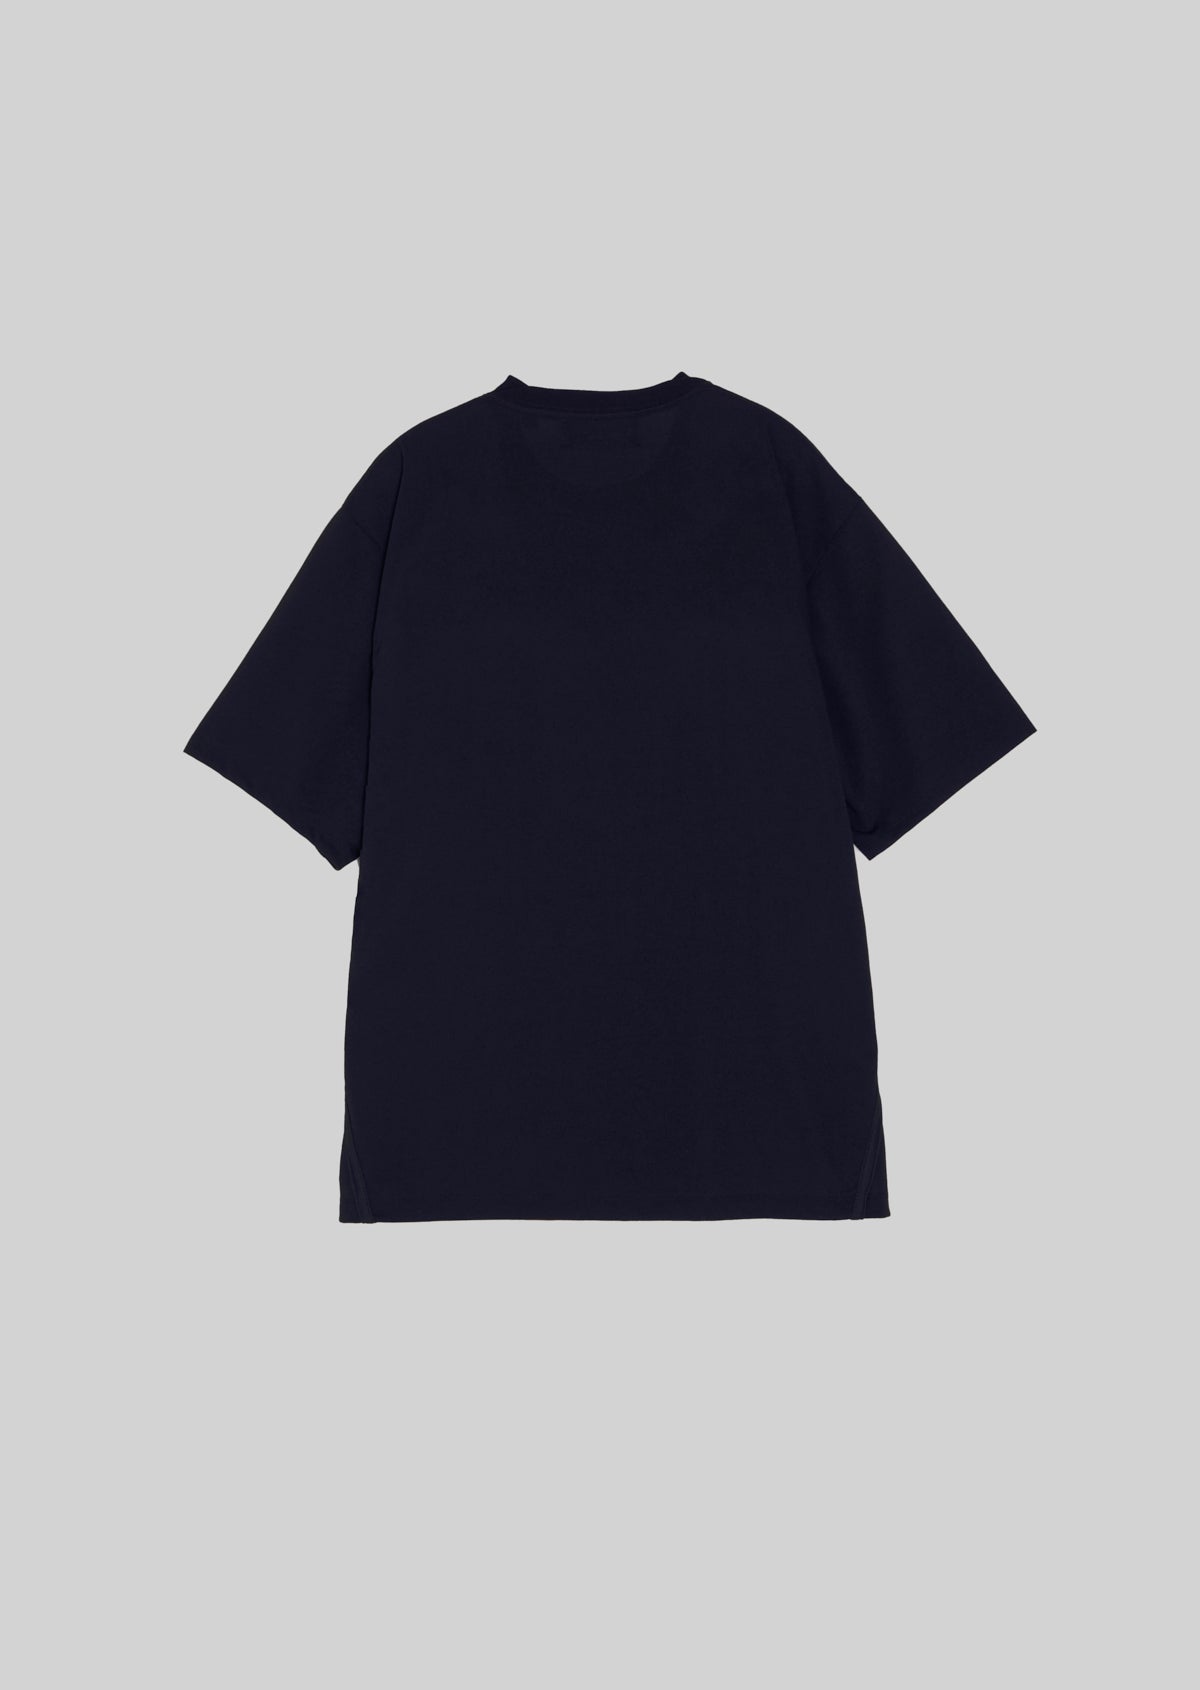 POLYESTER COTTON FEEL T-SHIRT NAVY 8001-1702